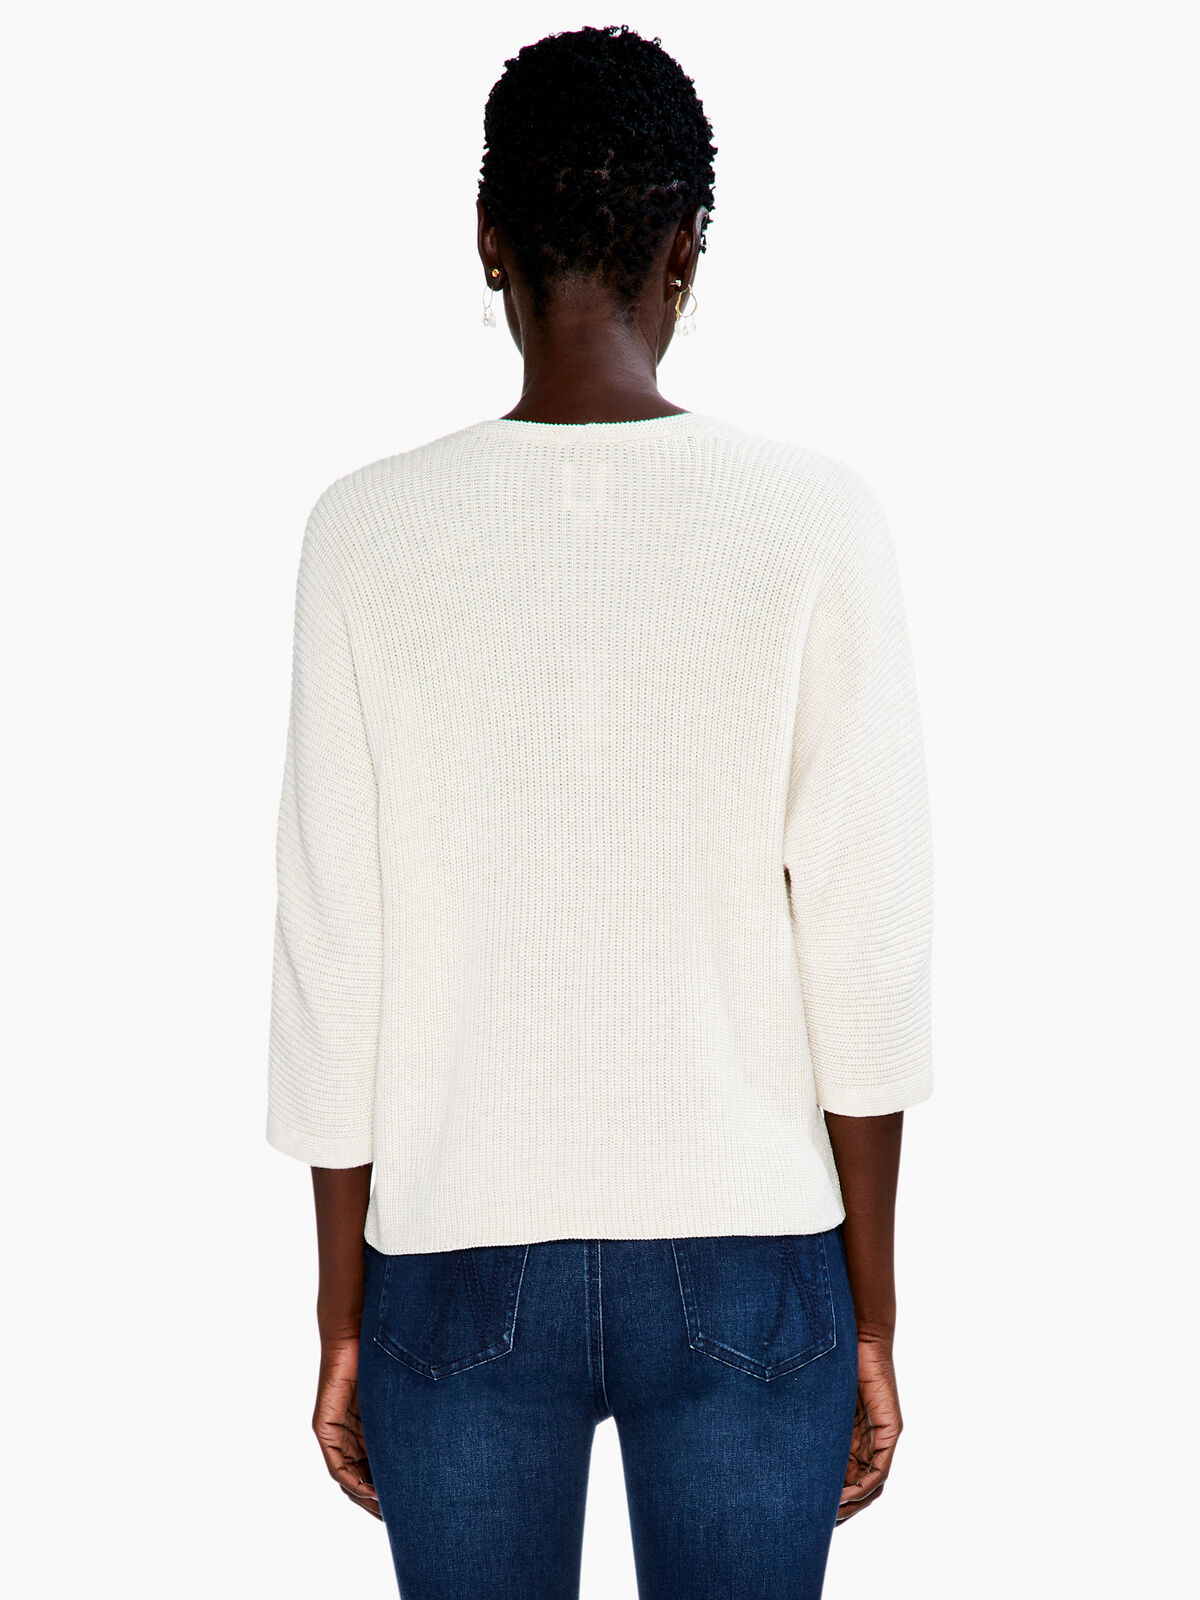 Relaxed Shaker Knit Sweater